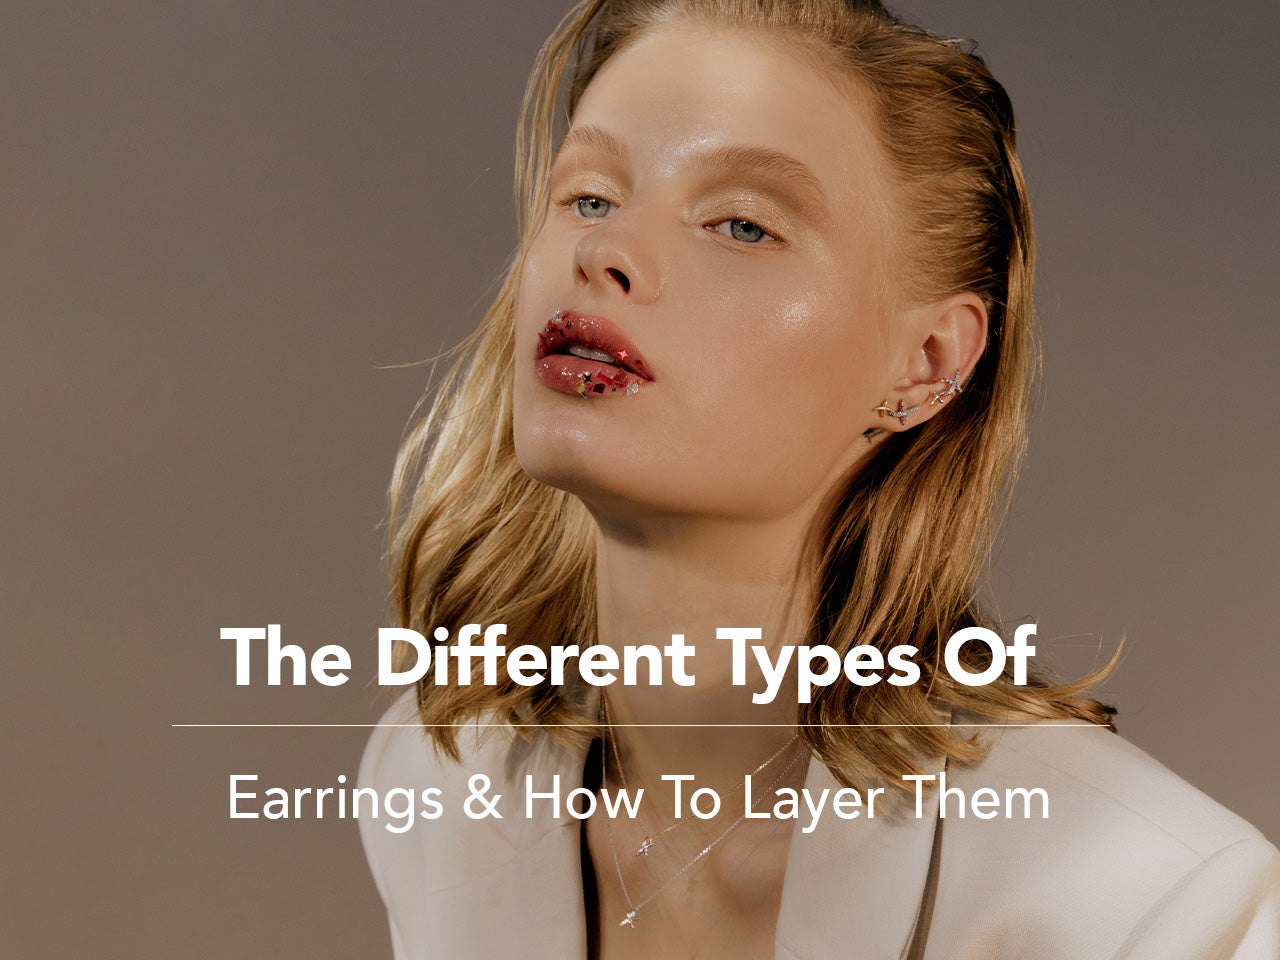 The Different Types Of Earrings & How To Layer Them